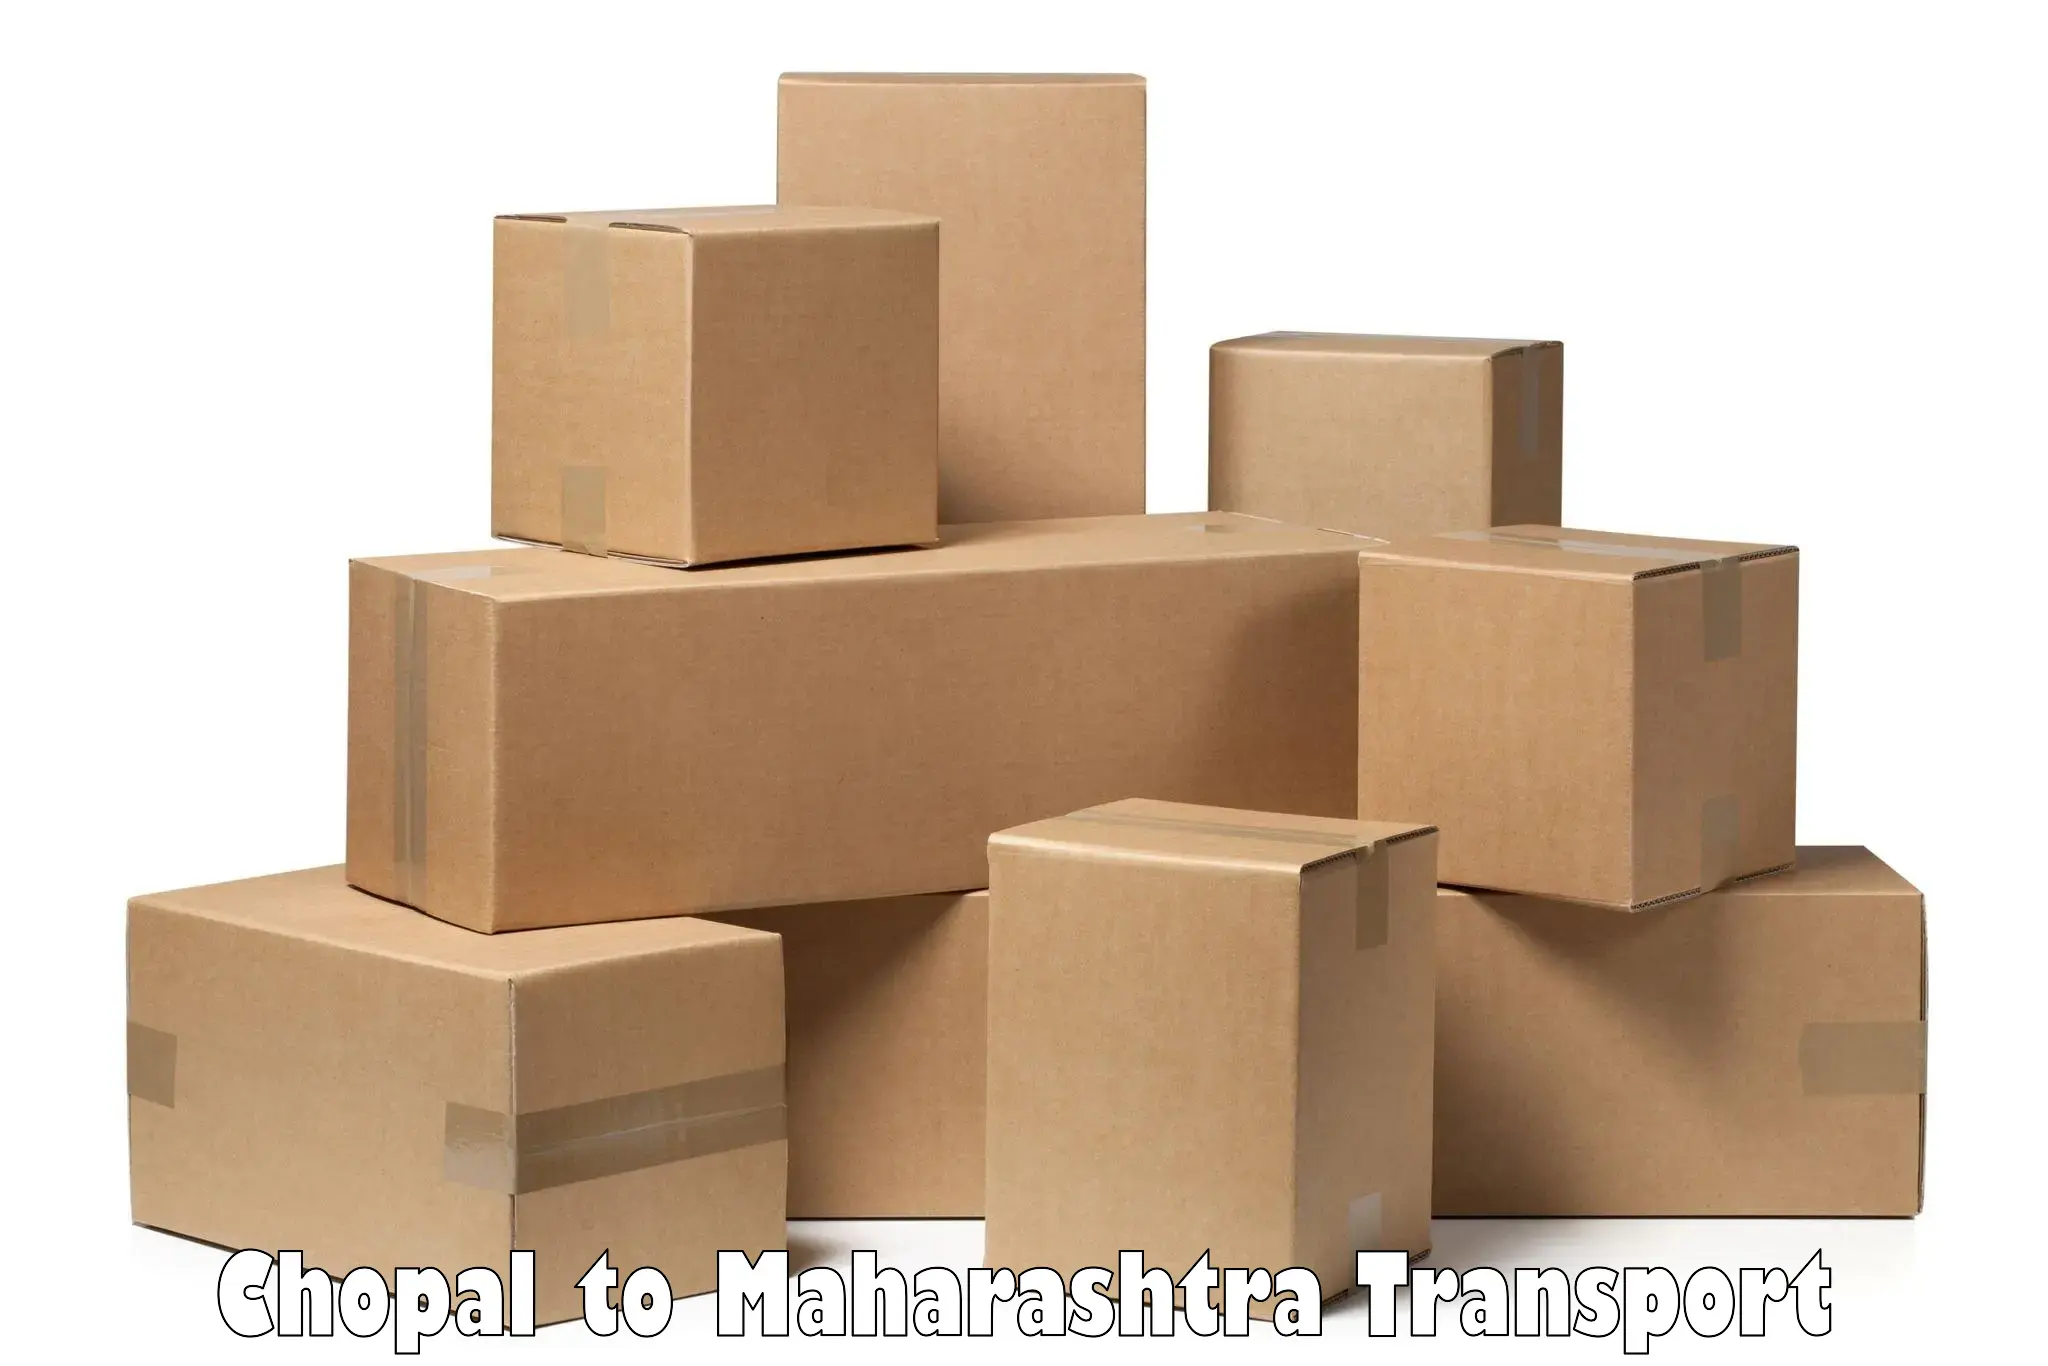 Part load transport service in India Chopal to Kudus